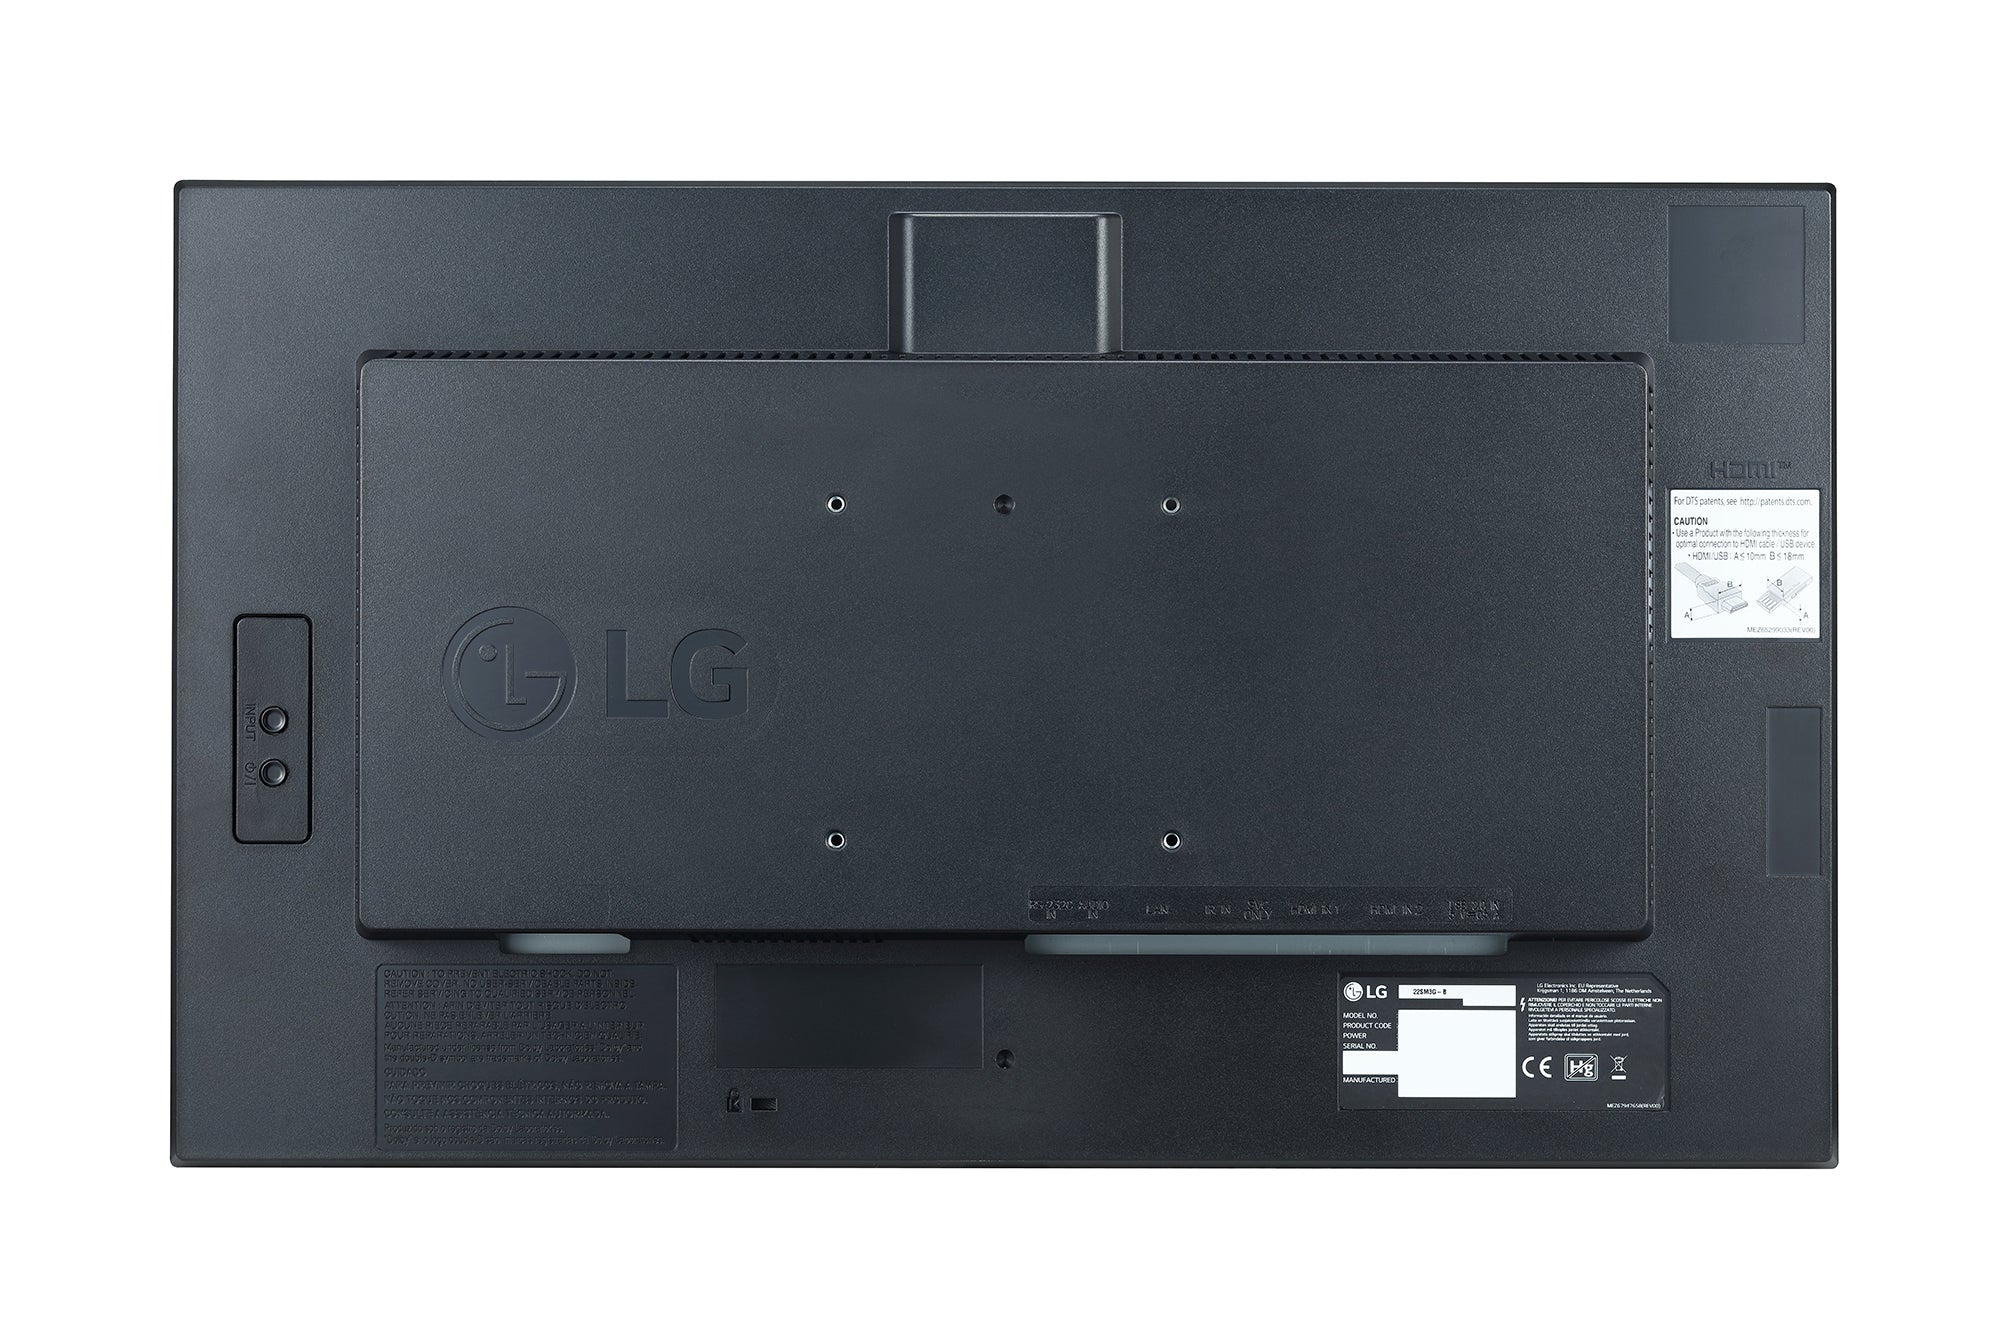 LG Commercial Signage Display SM3 series - 22"